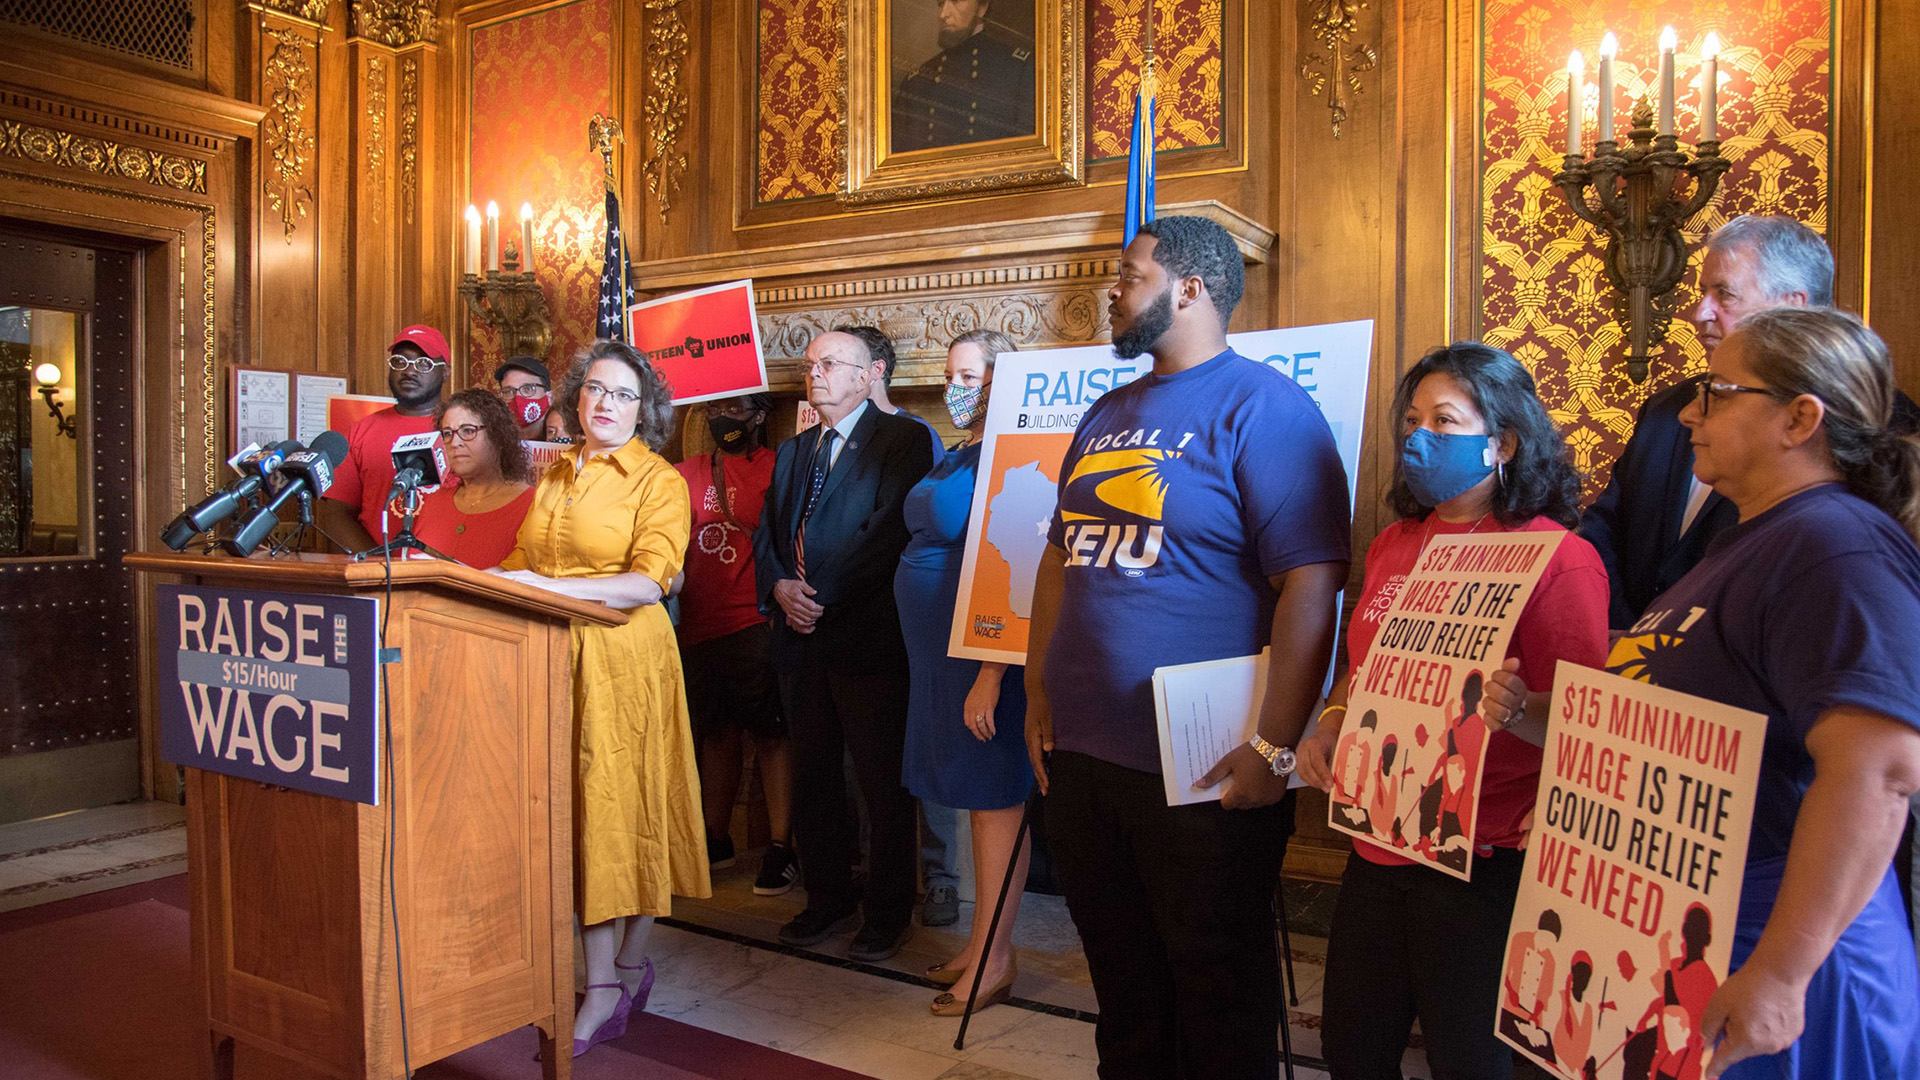 Lisa Subeck and Melissa Agard stand behind a wood podium with multiple microphones and a sign reading "Raise Wage" and "$15/Hour," with other people standing behind and on either side of them, with several holding a poster reading "$15 Minimum Wage is the Covid Relief We Need" in room with ornate wood paneling, wallpaper and wall sconces.